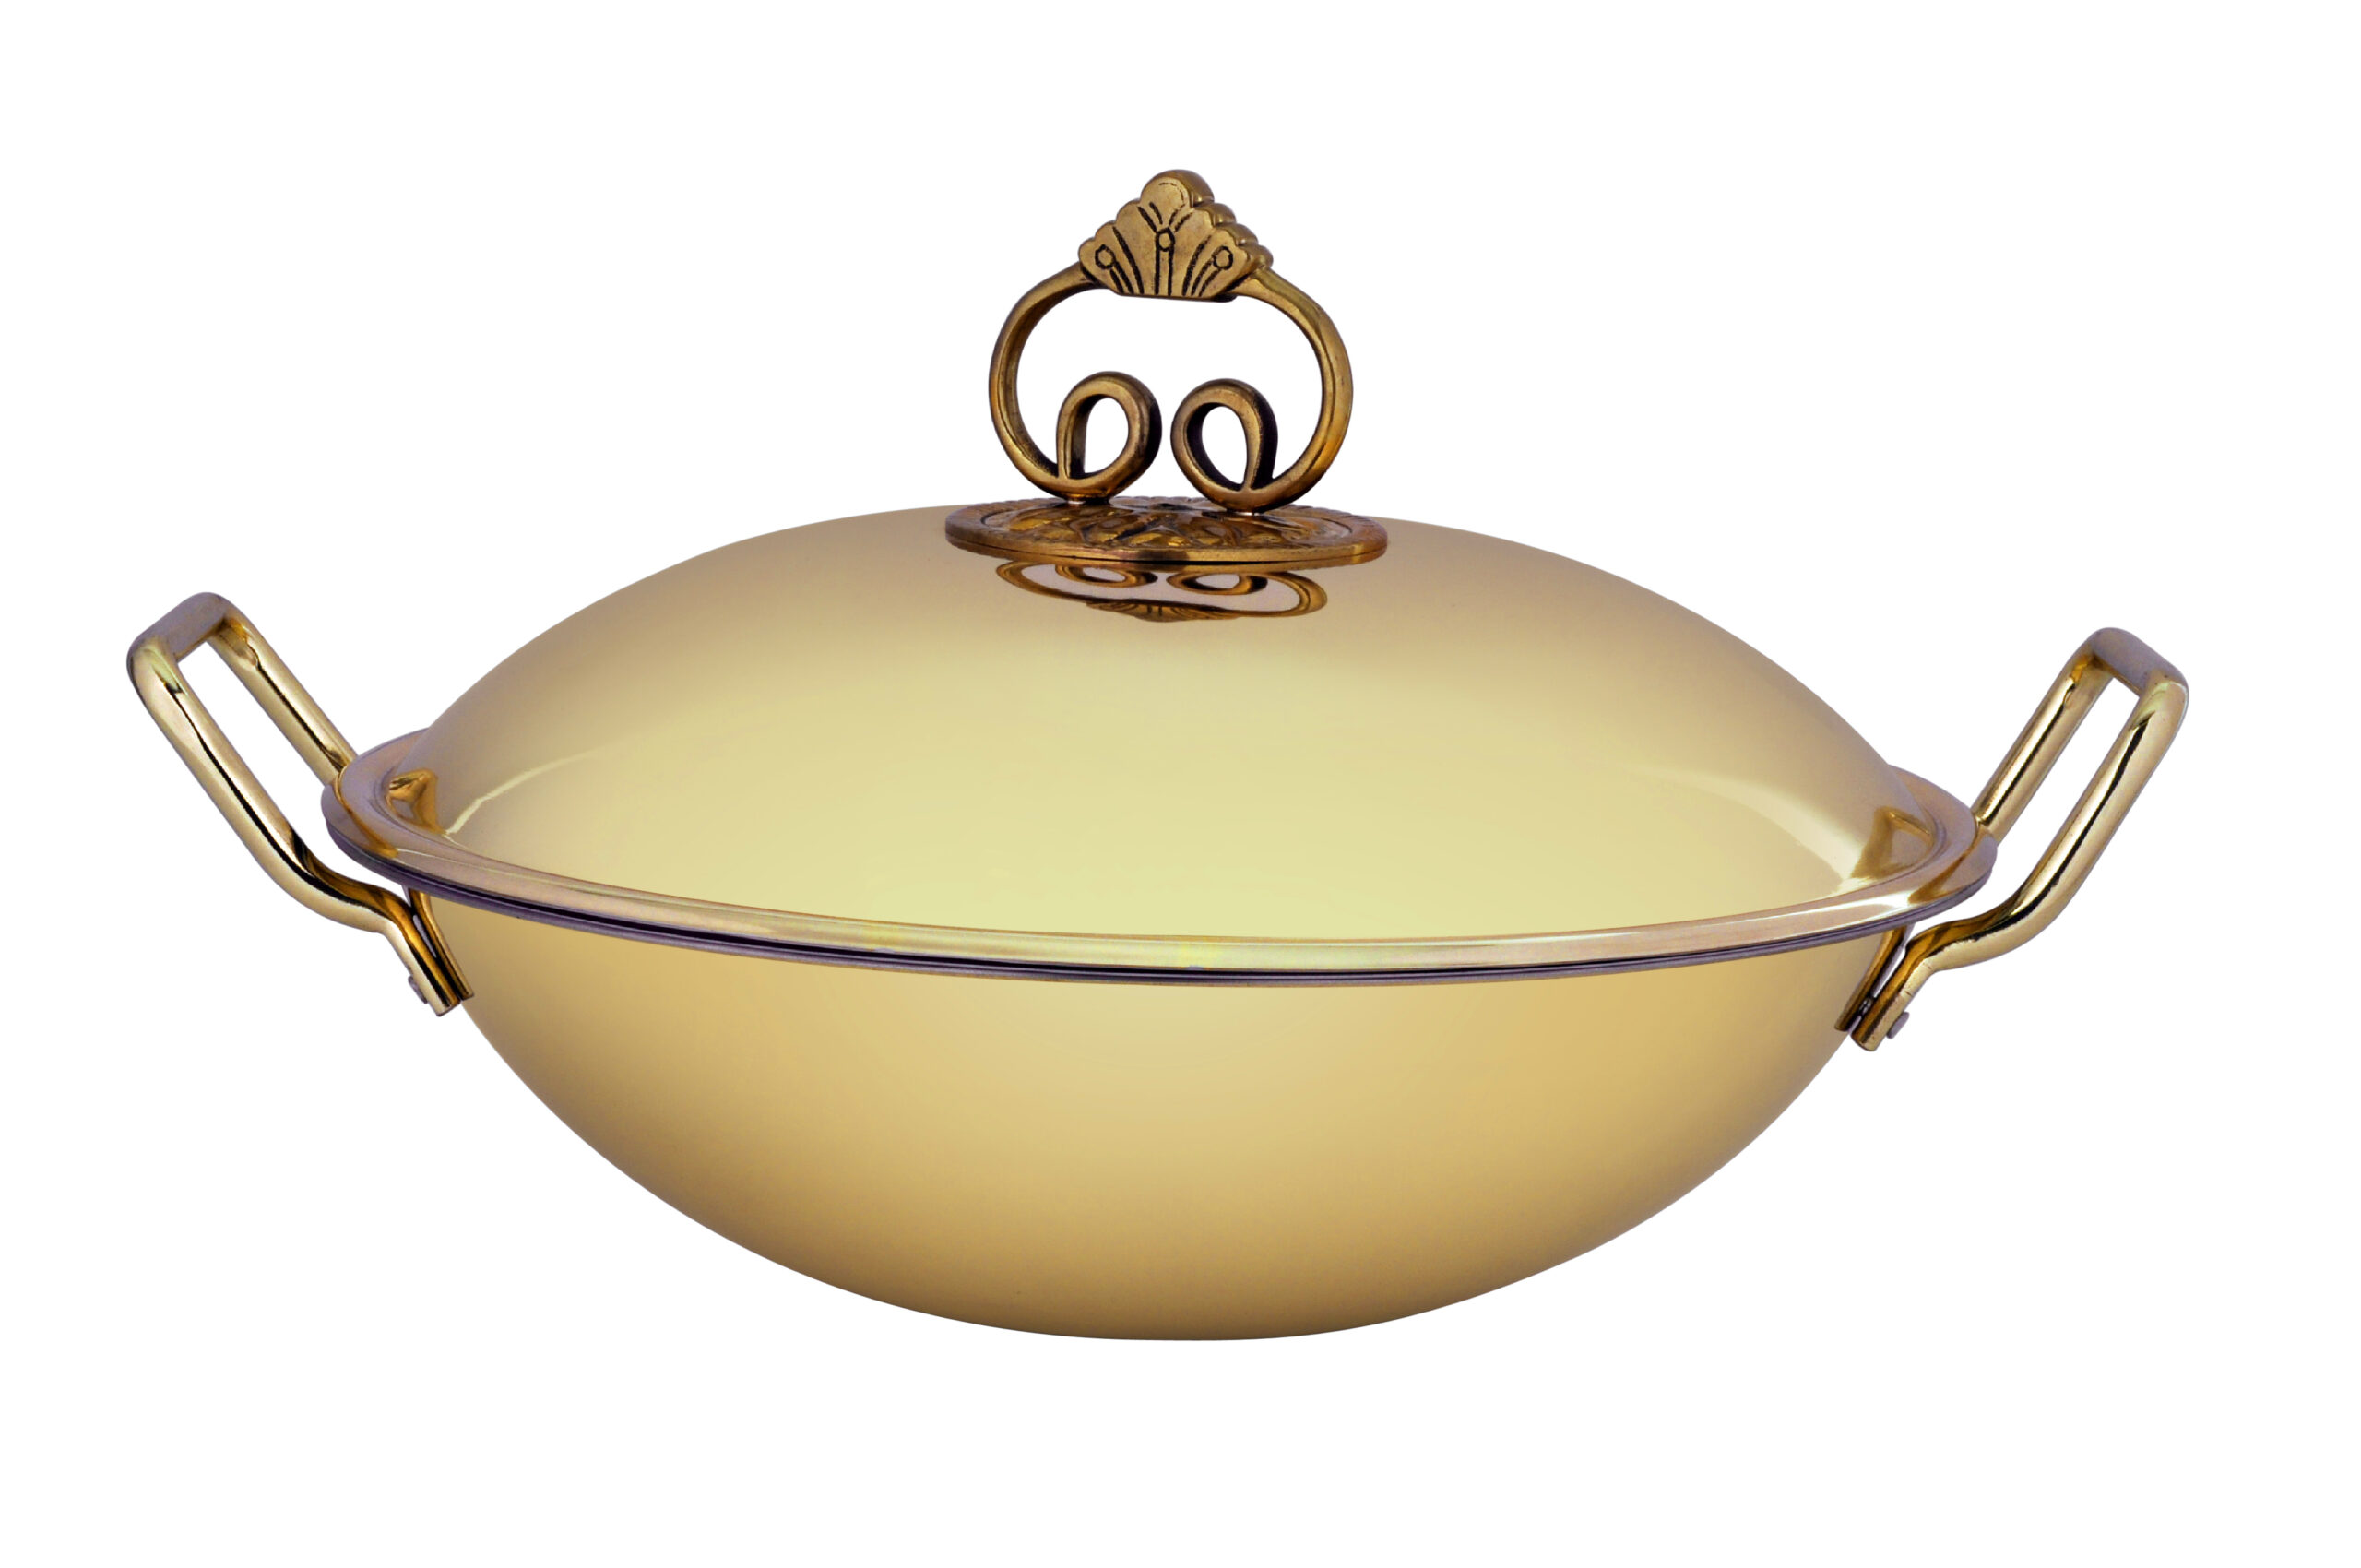 Baroque Mirror Gold Finish Round Induction Wok with Lid